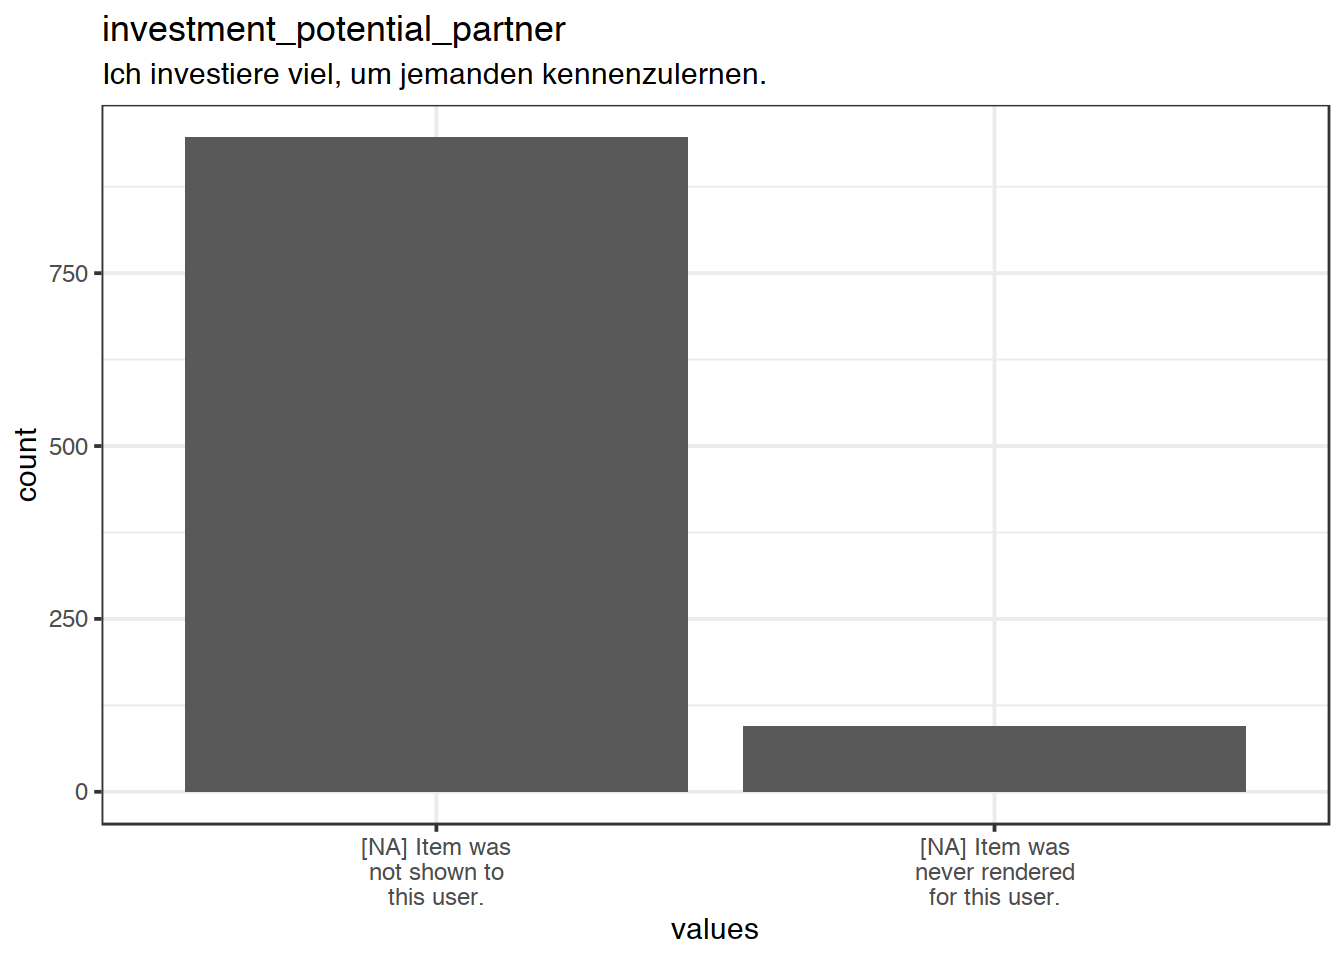 Plot of missing values for investment_potential_partner